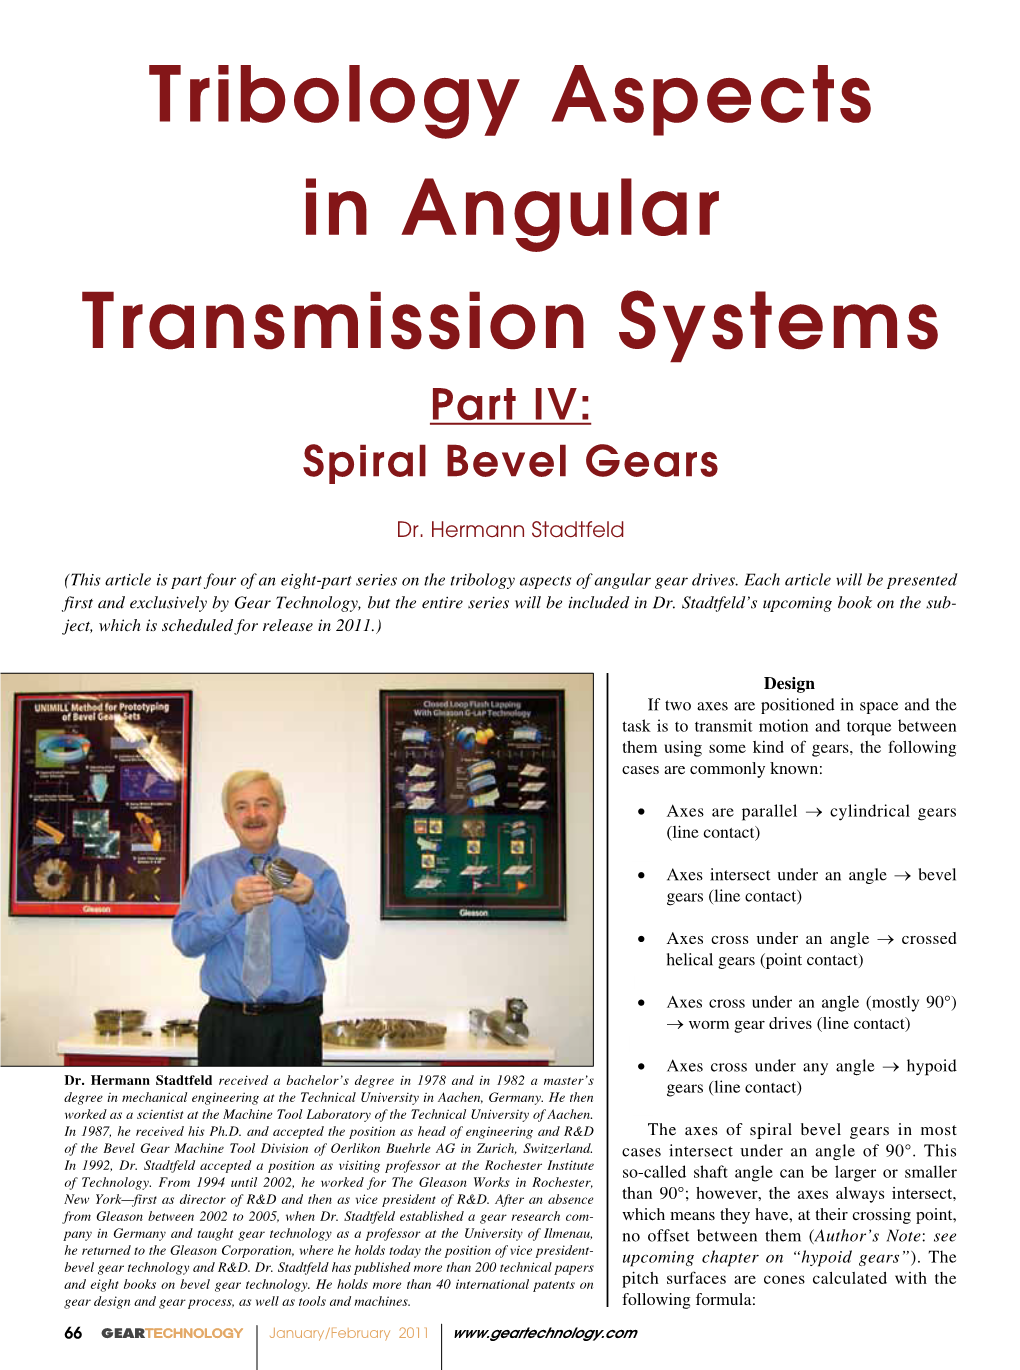 Tribology Aspects in Angular Transmission Systems, Part IV